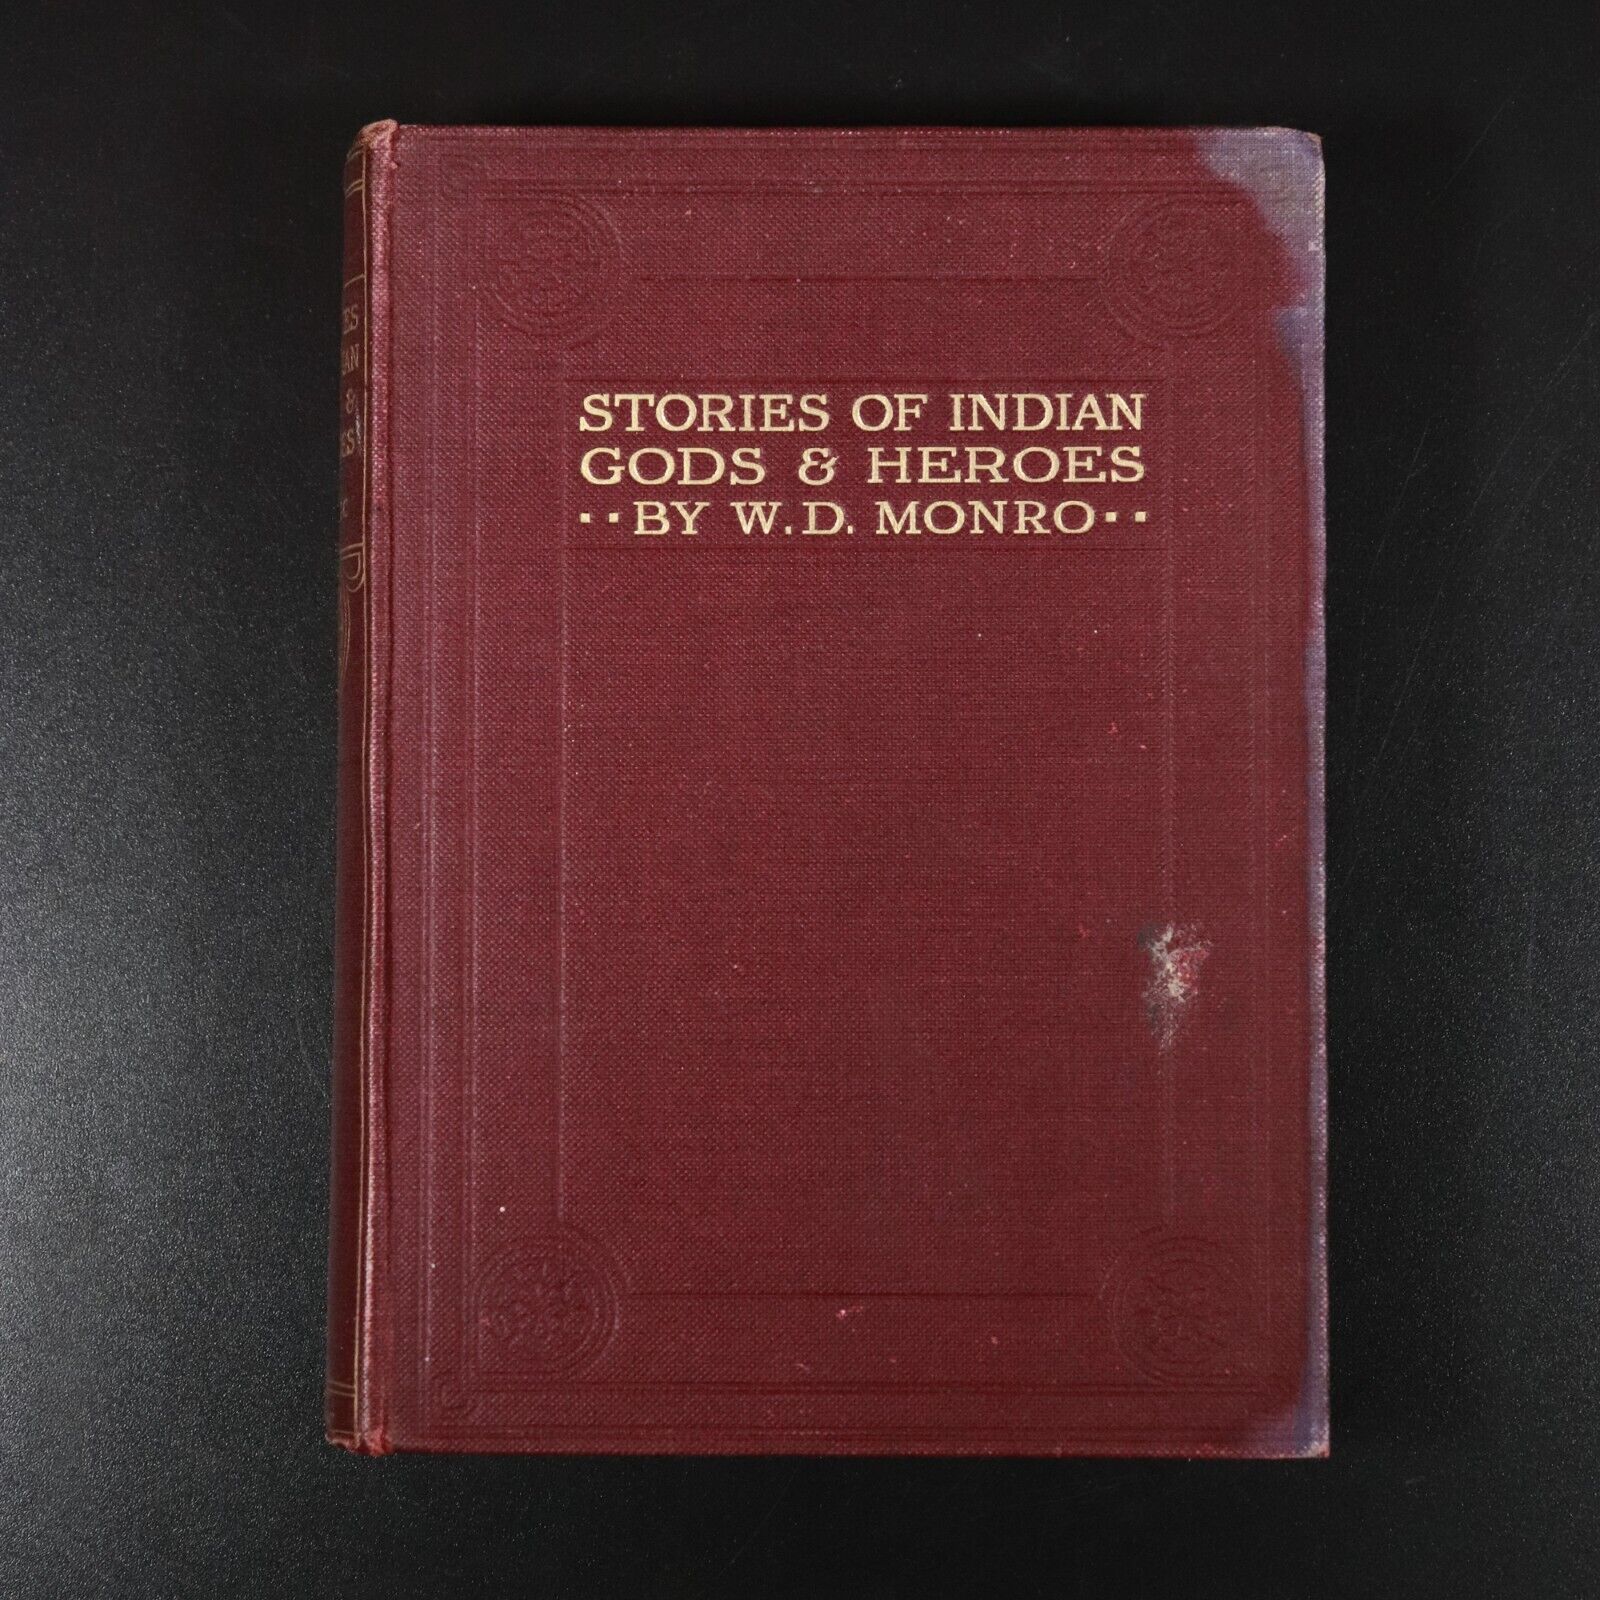 1912 Stories Of Indian Gods & Heroes by W.D. Monro Antique Literature Book